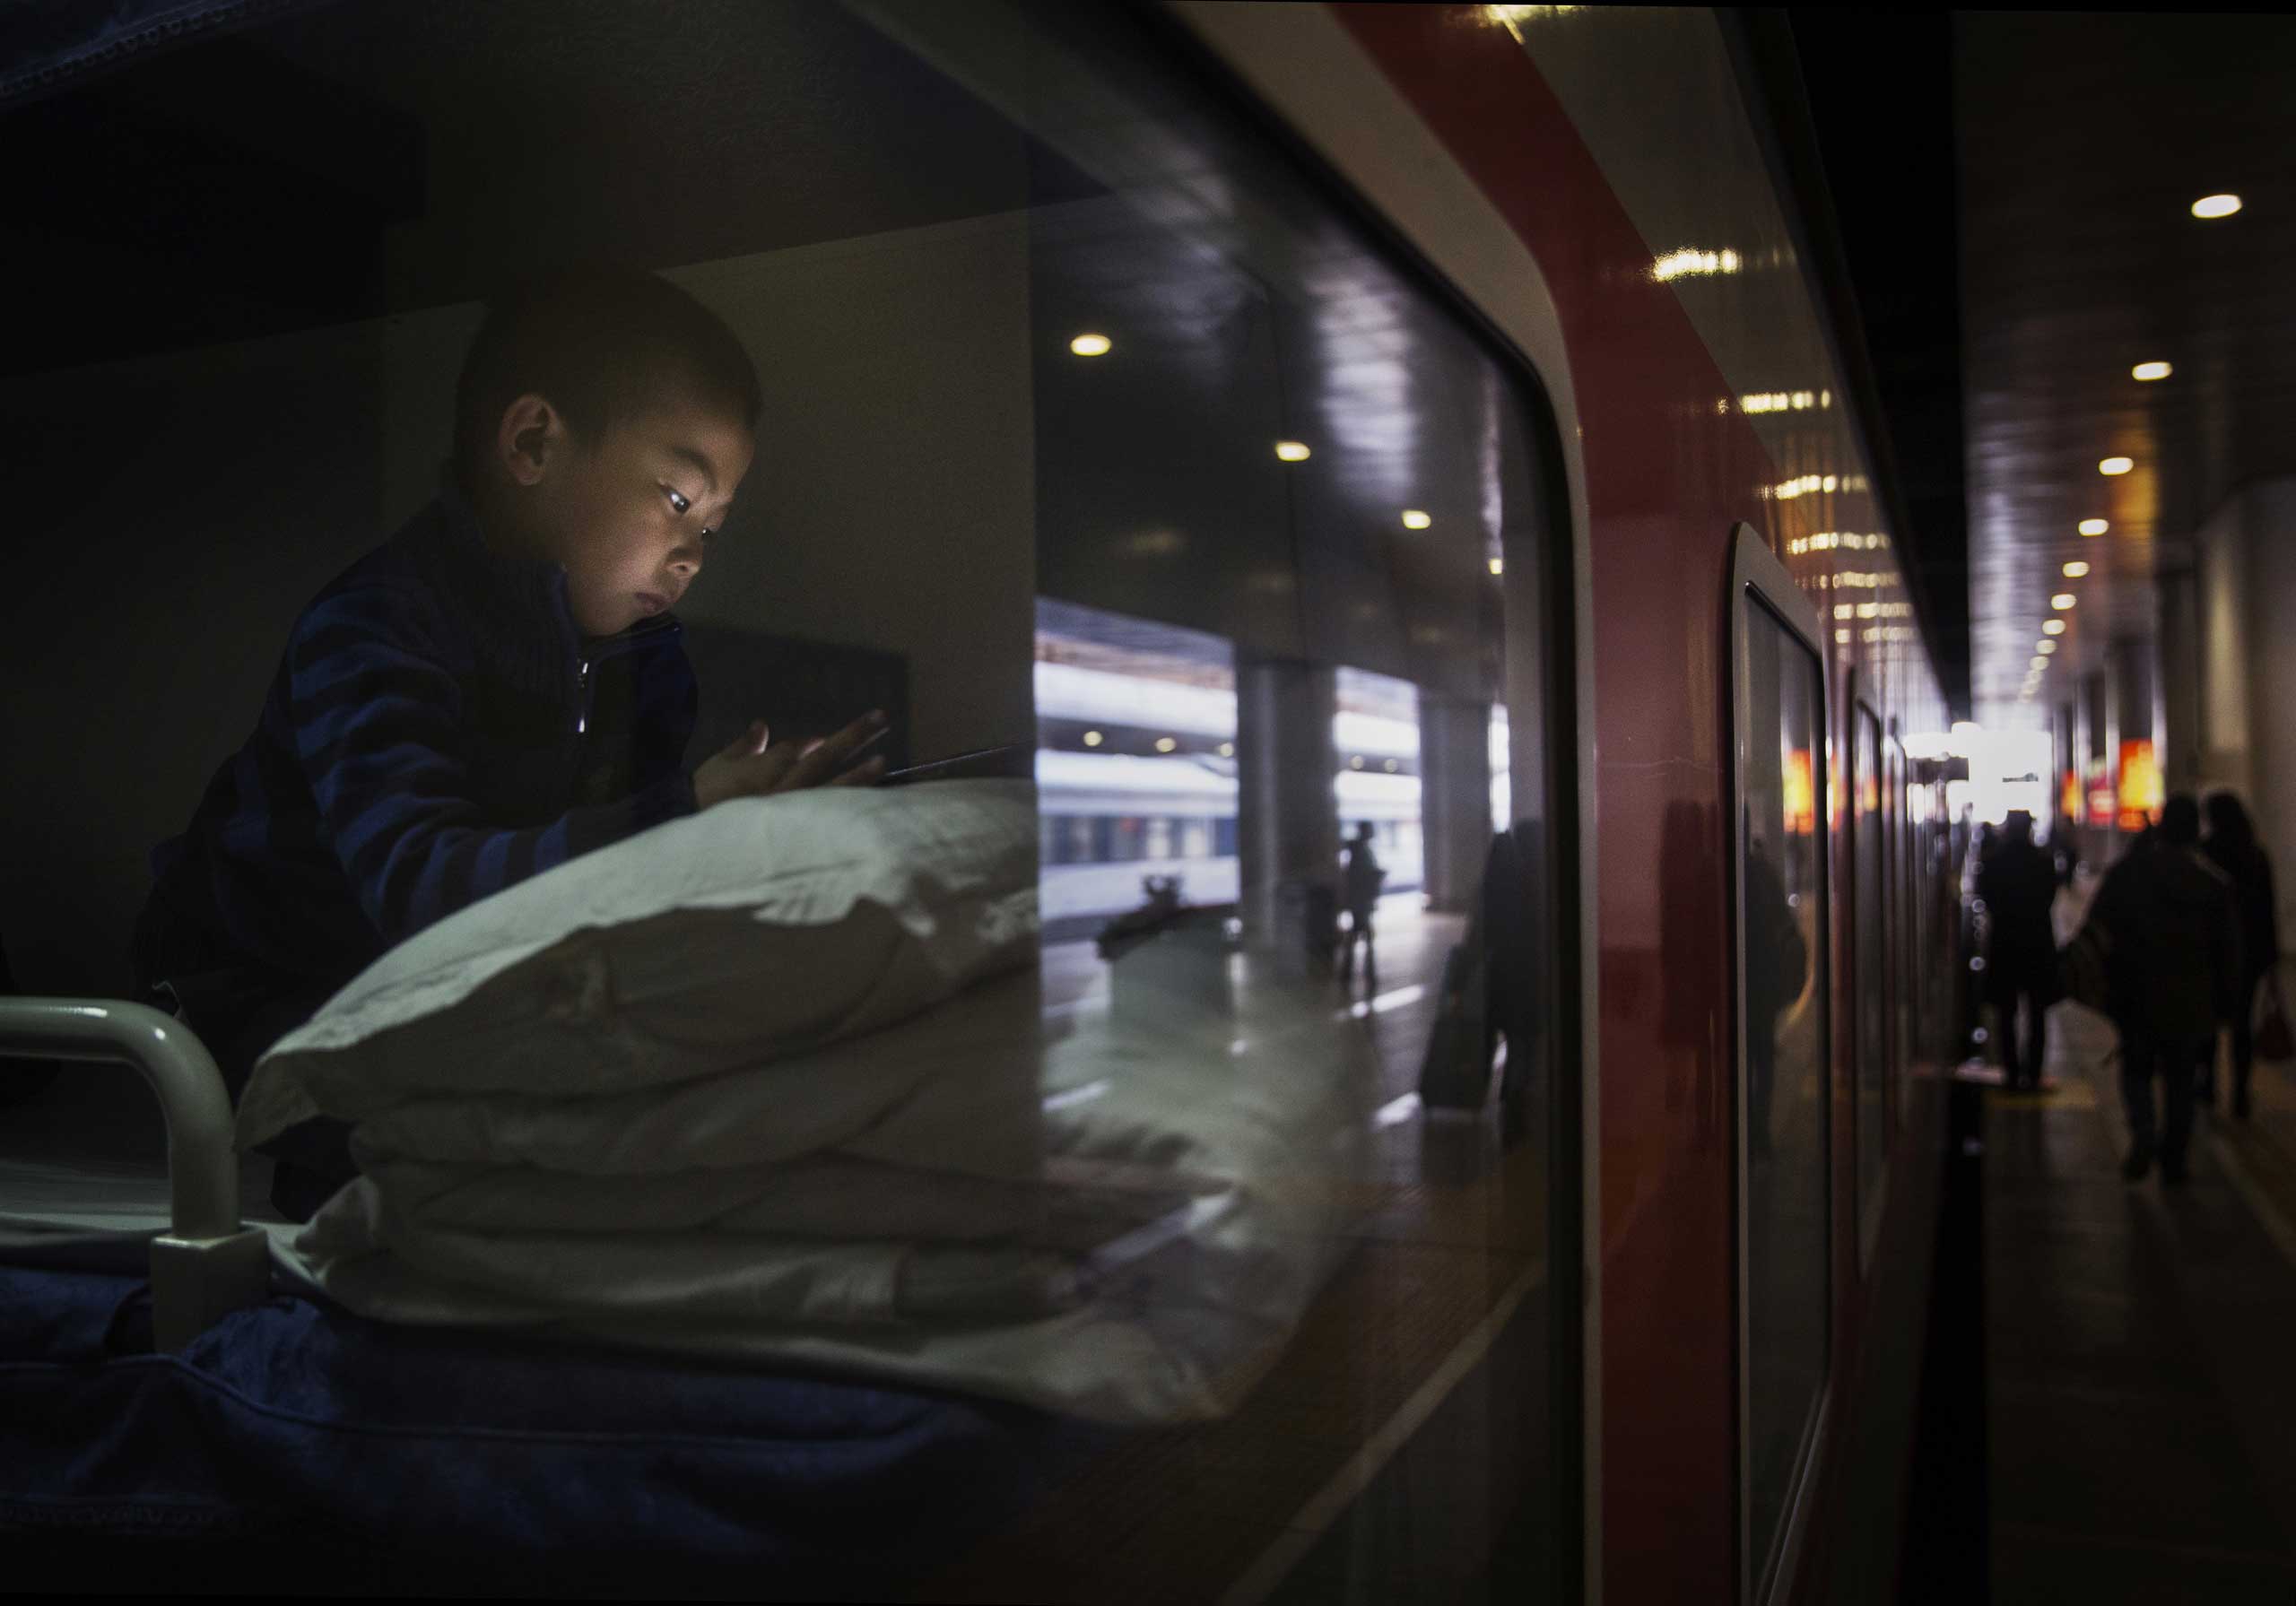 A boy uses a portable device as he lays in a sleeper on a train before leaving for the  Spring Festival at a local railway station on Feb. 17, 2015 in Beijing.